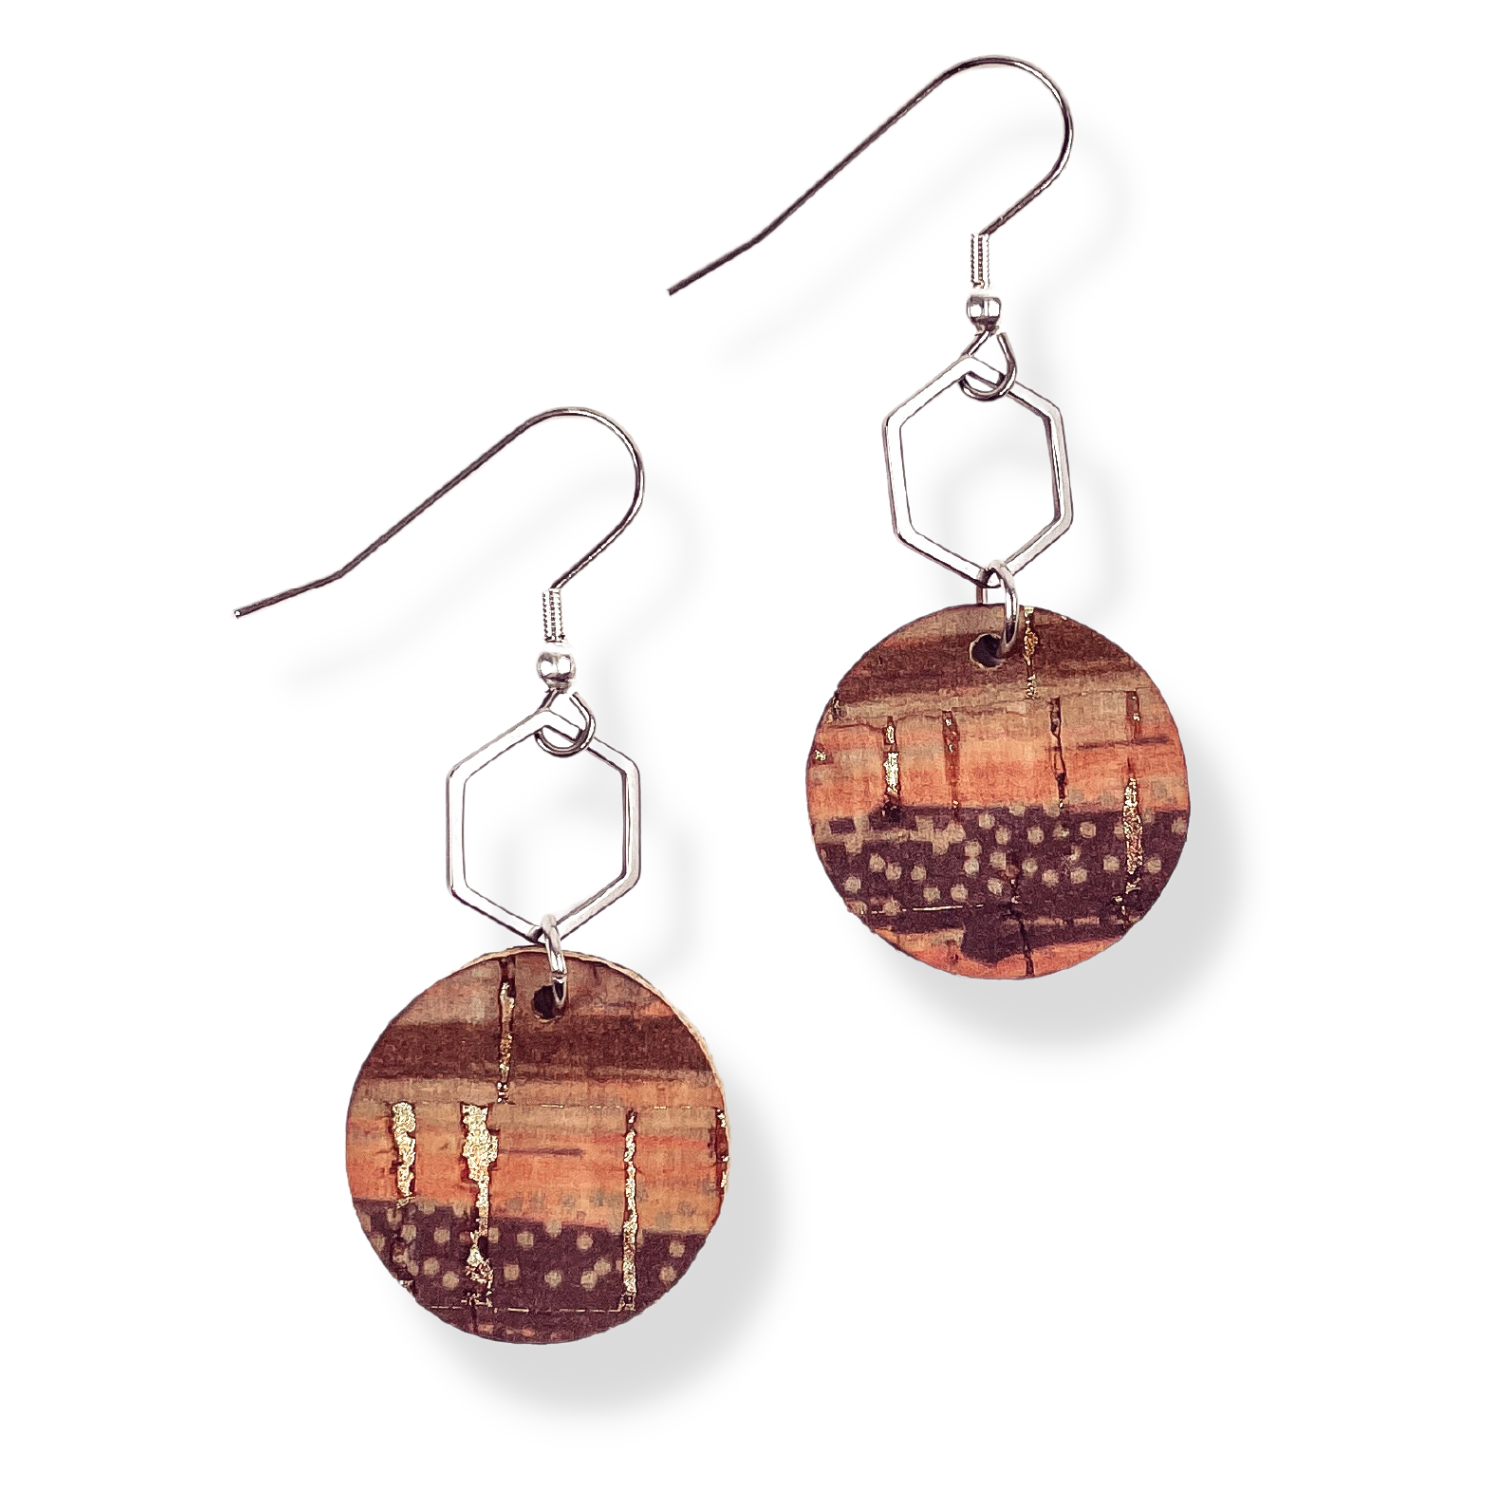 Elizabeth Gold or Silver Hexagon and Cork Earrings- Sunset Stripes